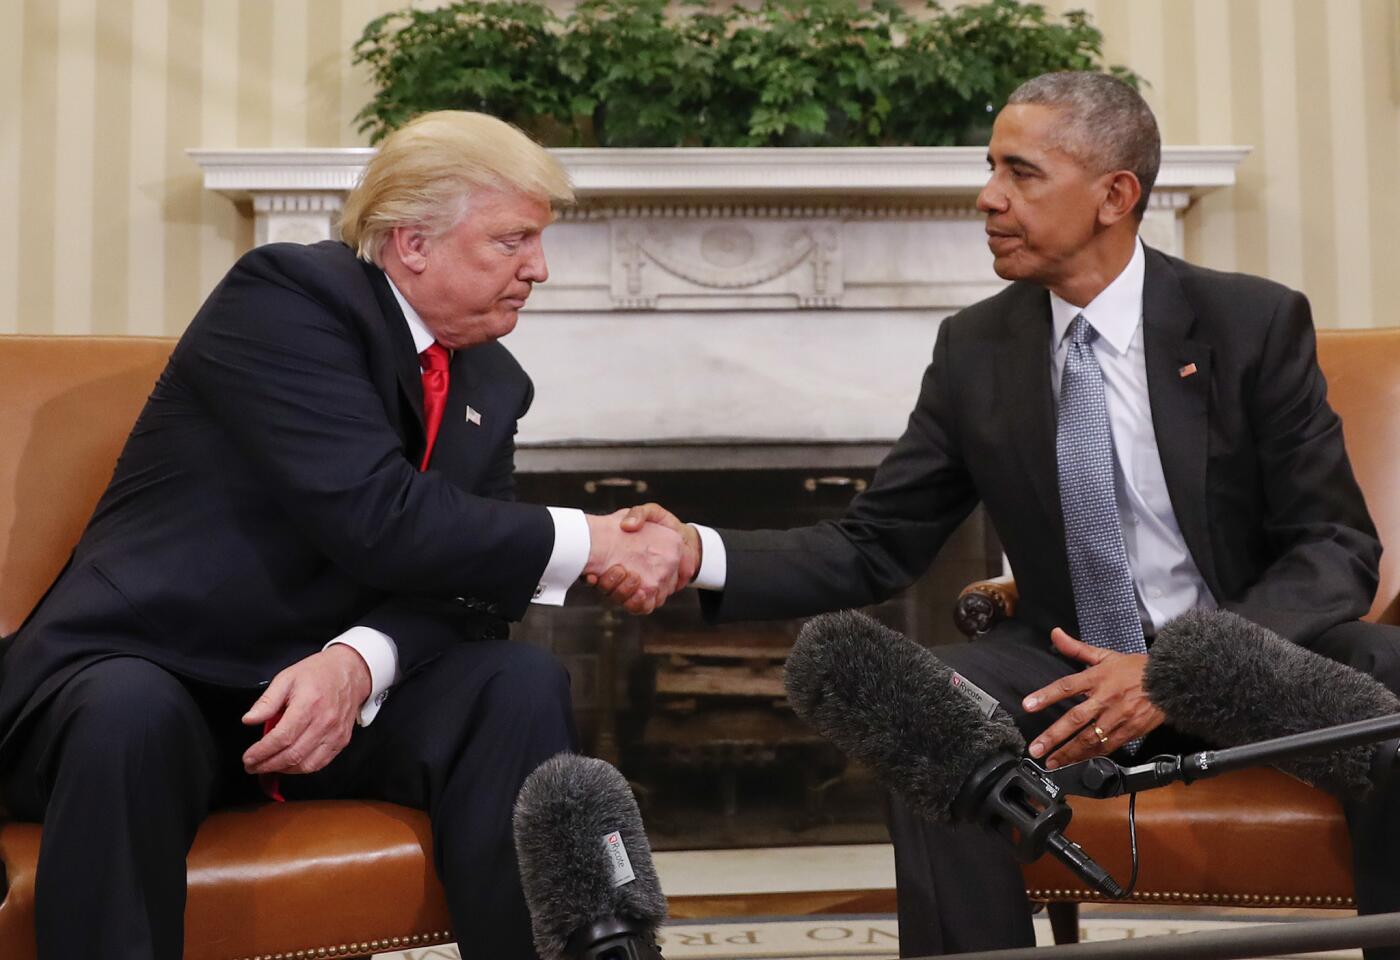 President Barack Obama and President-elect Donald Trump shake hands following their meeting in the Oval Office of the White House on Nov. 10, 2016.